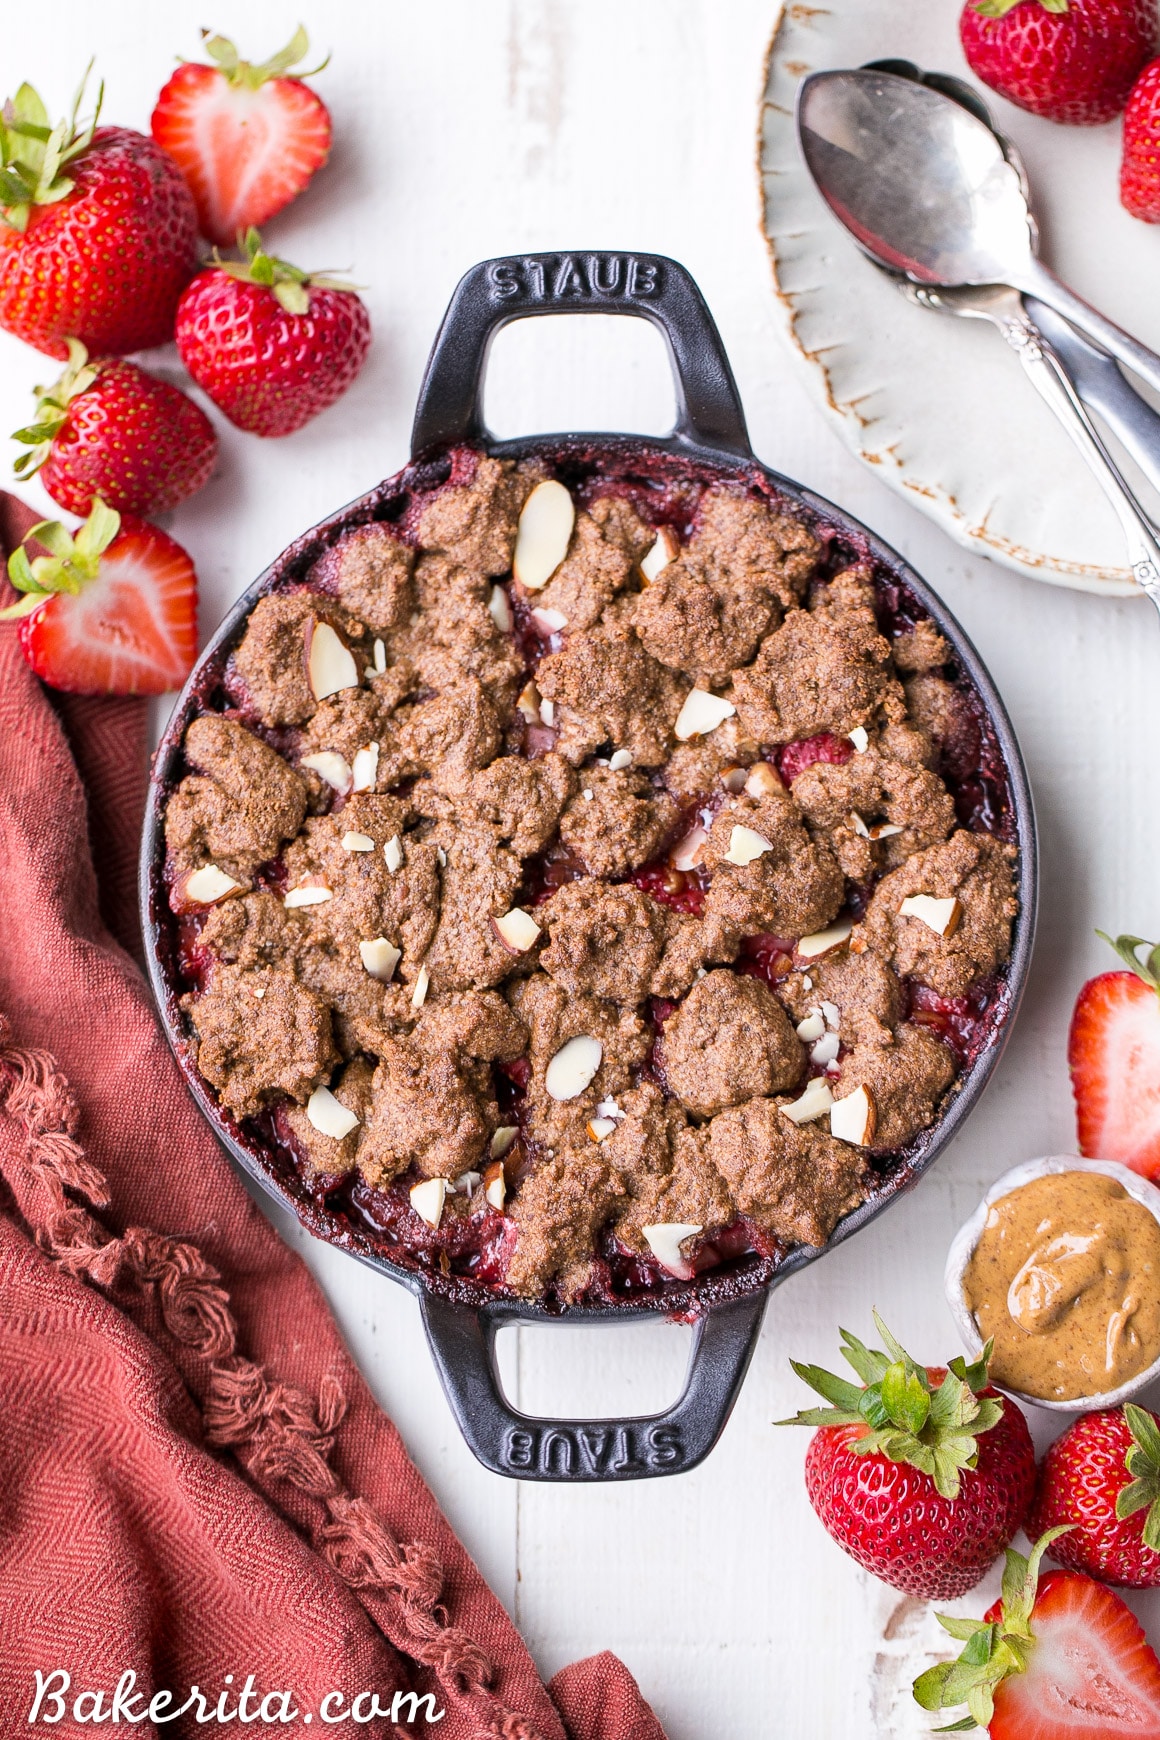 This Strawberry Crisp with Almond Butter Crumble is an irresistible pairing of fresh strawberries and a lightly-sweetened, rich and crispy almond butter cookie crumble. You won't be able to resist this gluten-free, paleo, and vegan dessert.